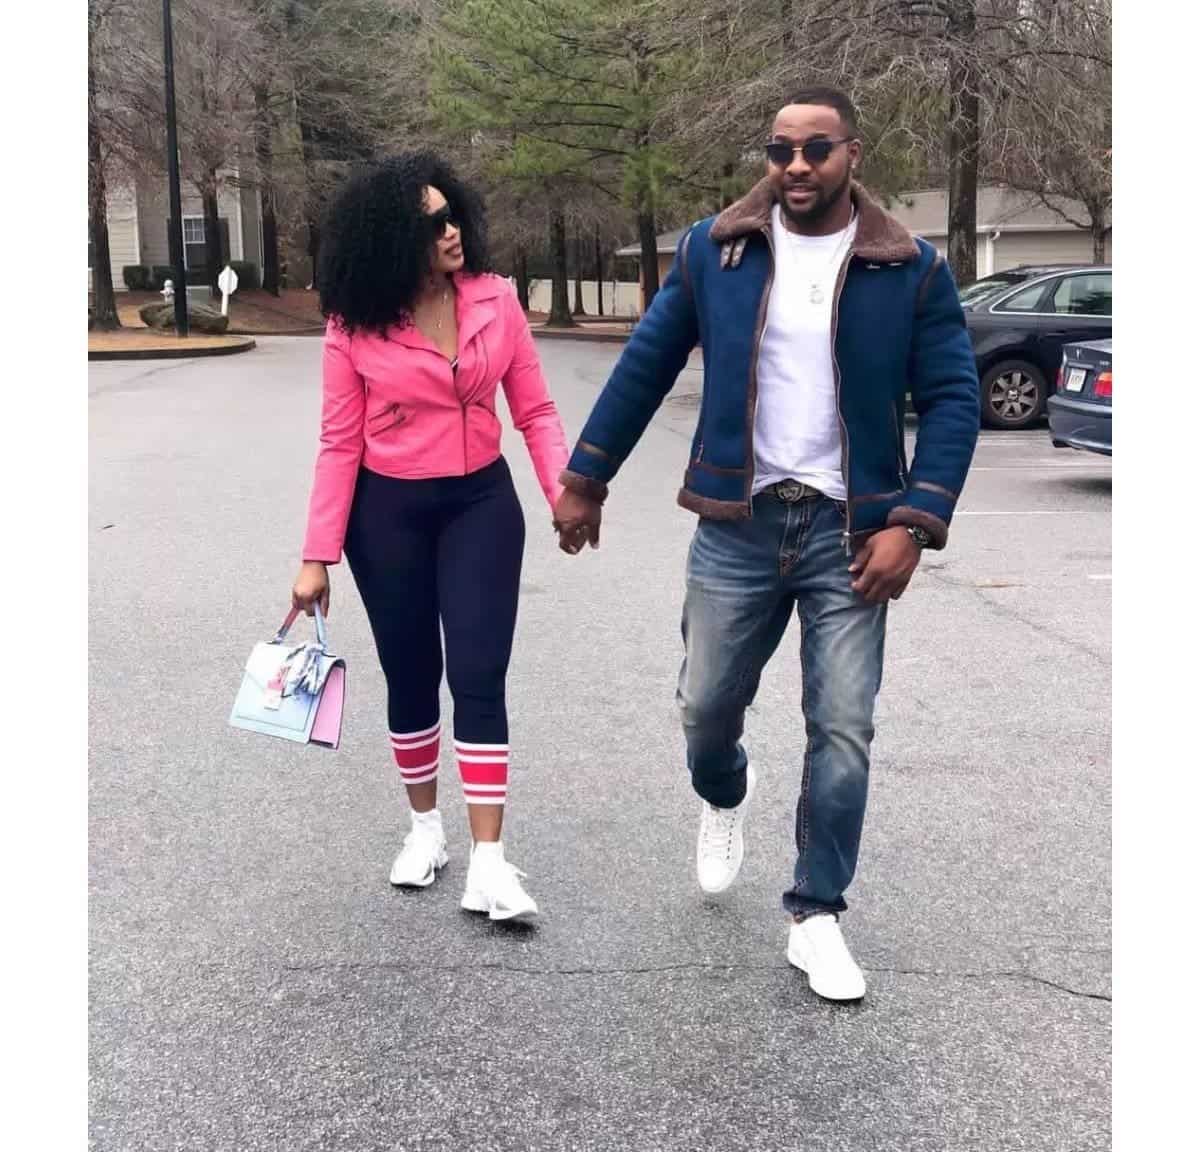 Nollywood actor, Bolanle Ninalowo surprises wife with an expensive gift ...